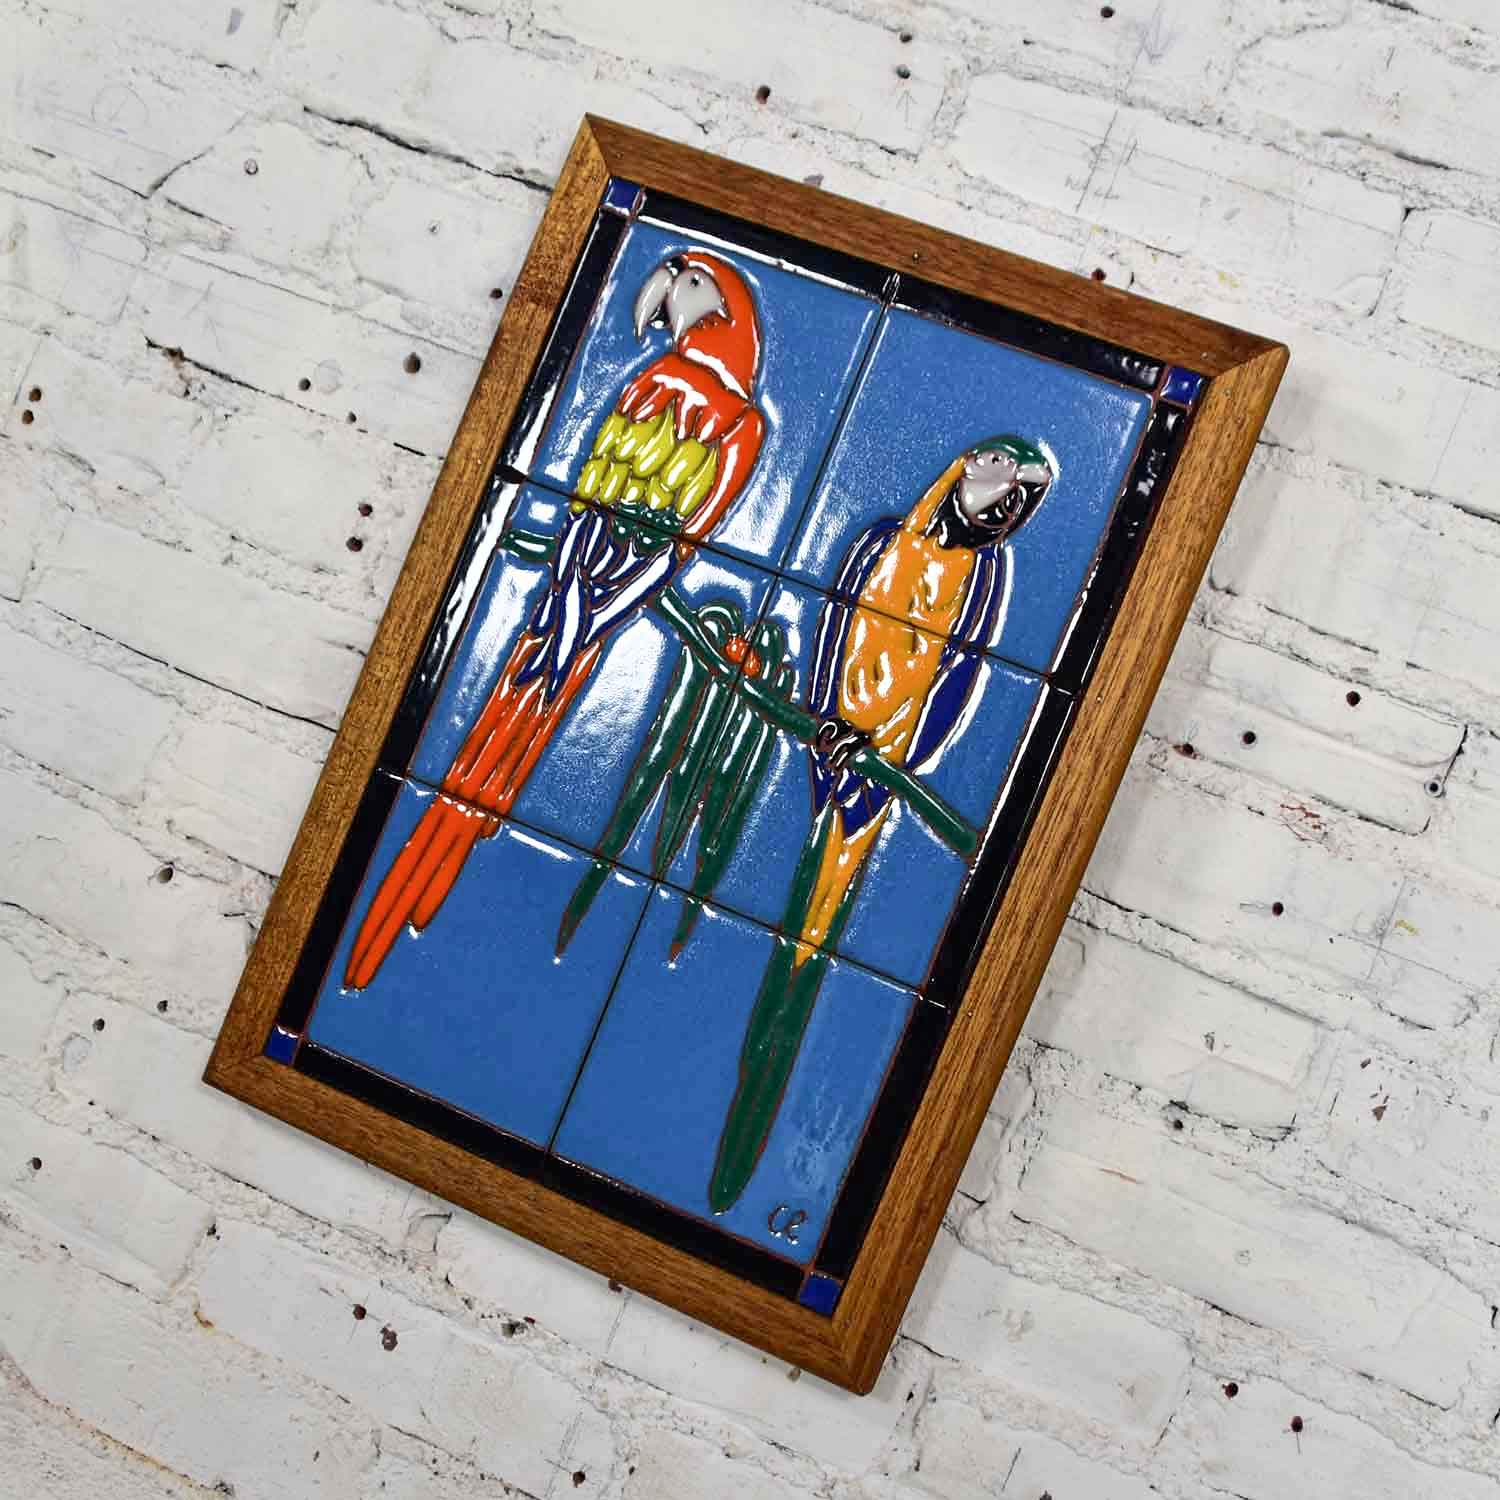 20th Century Catalina Style Majolica Parrot Ceramic Tile Plaque by Christopher Reutinger for Catalina Picture Tile